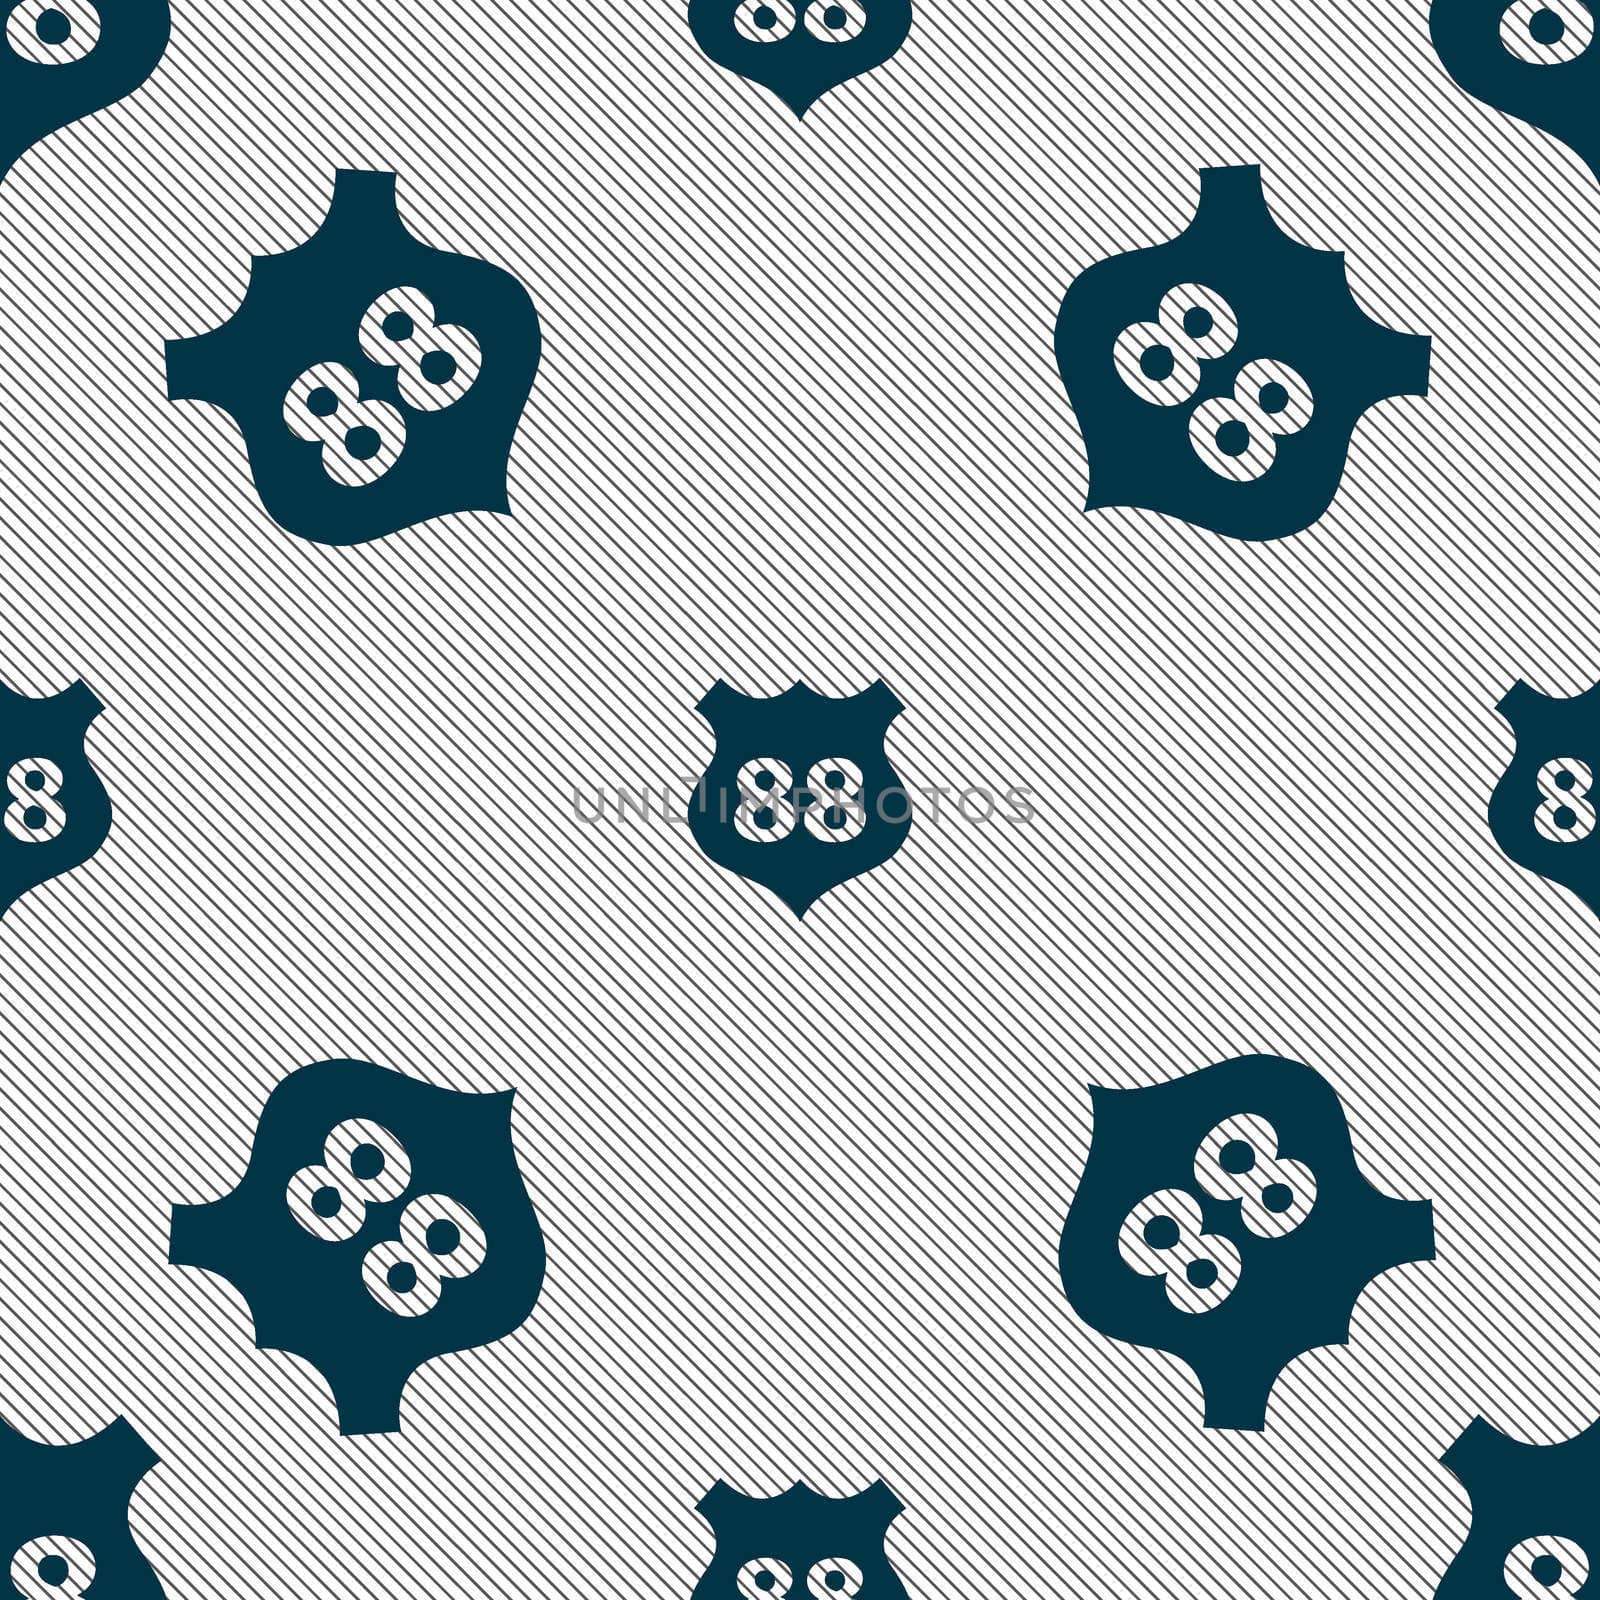 Route 88 highway icon sign. Seamless pattern with geometric texture. illustration